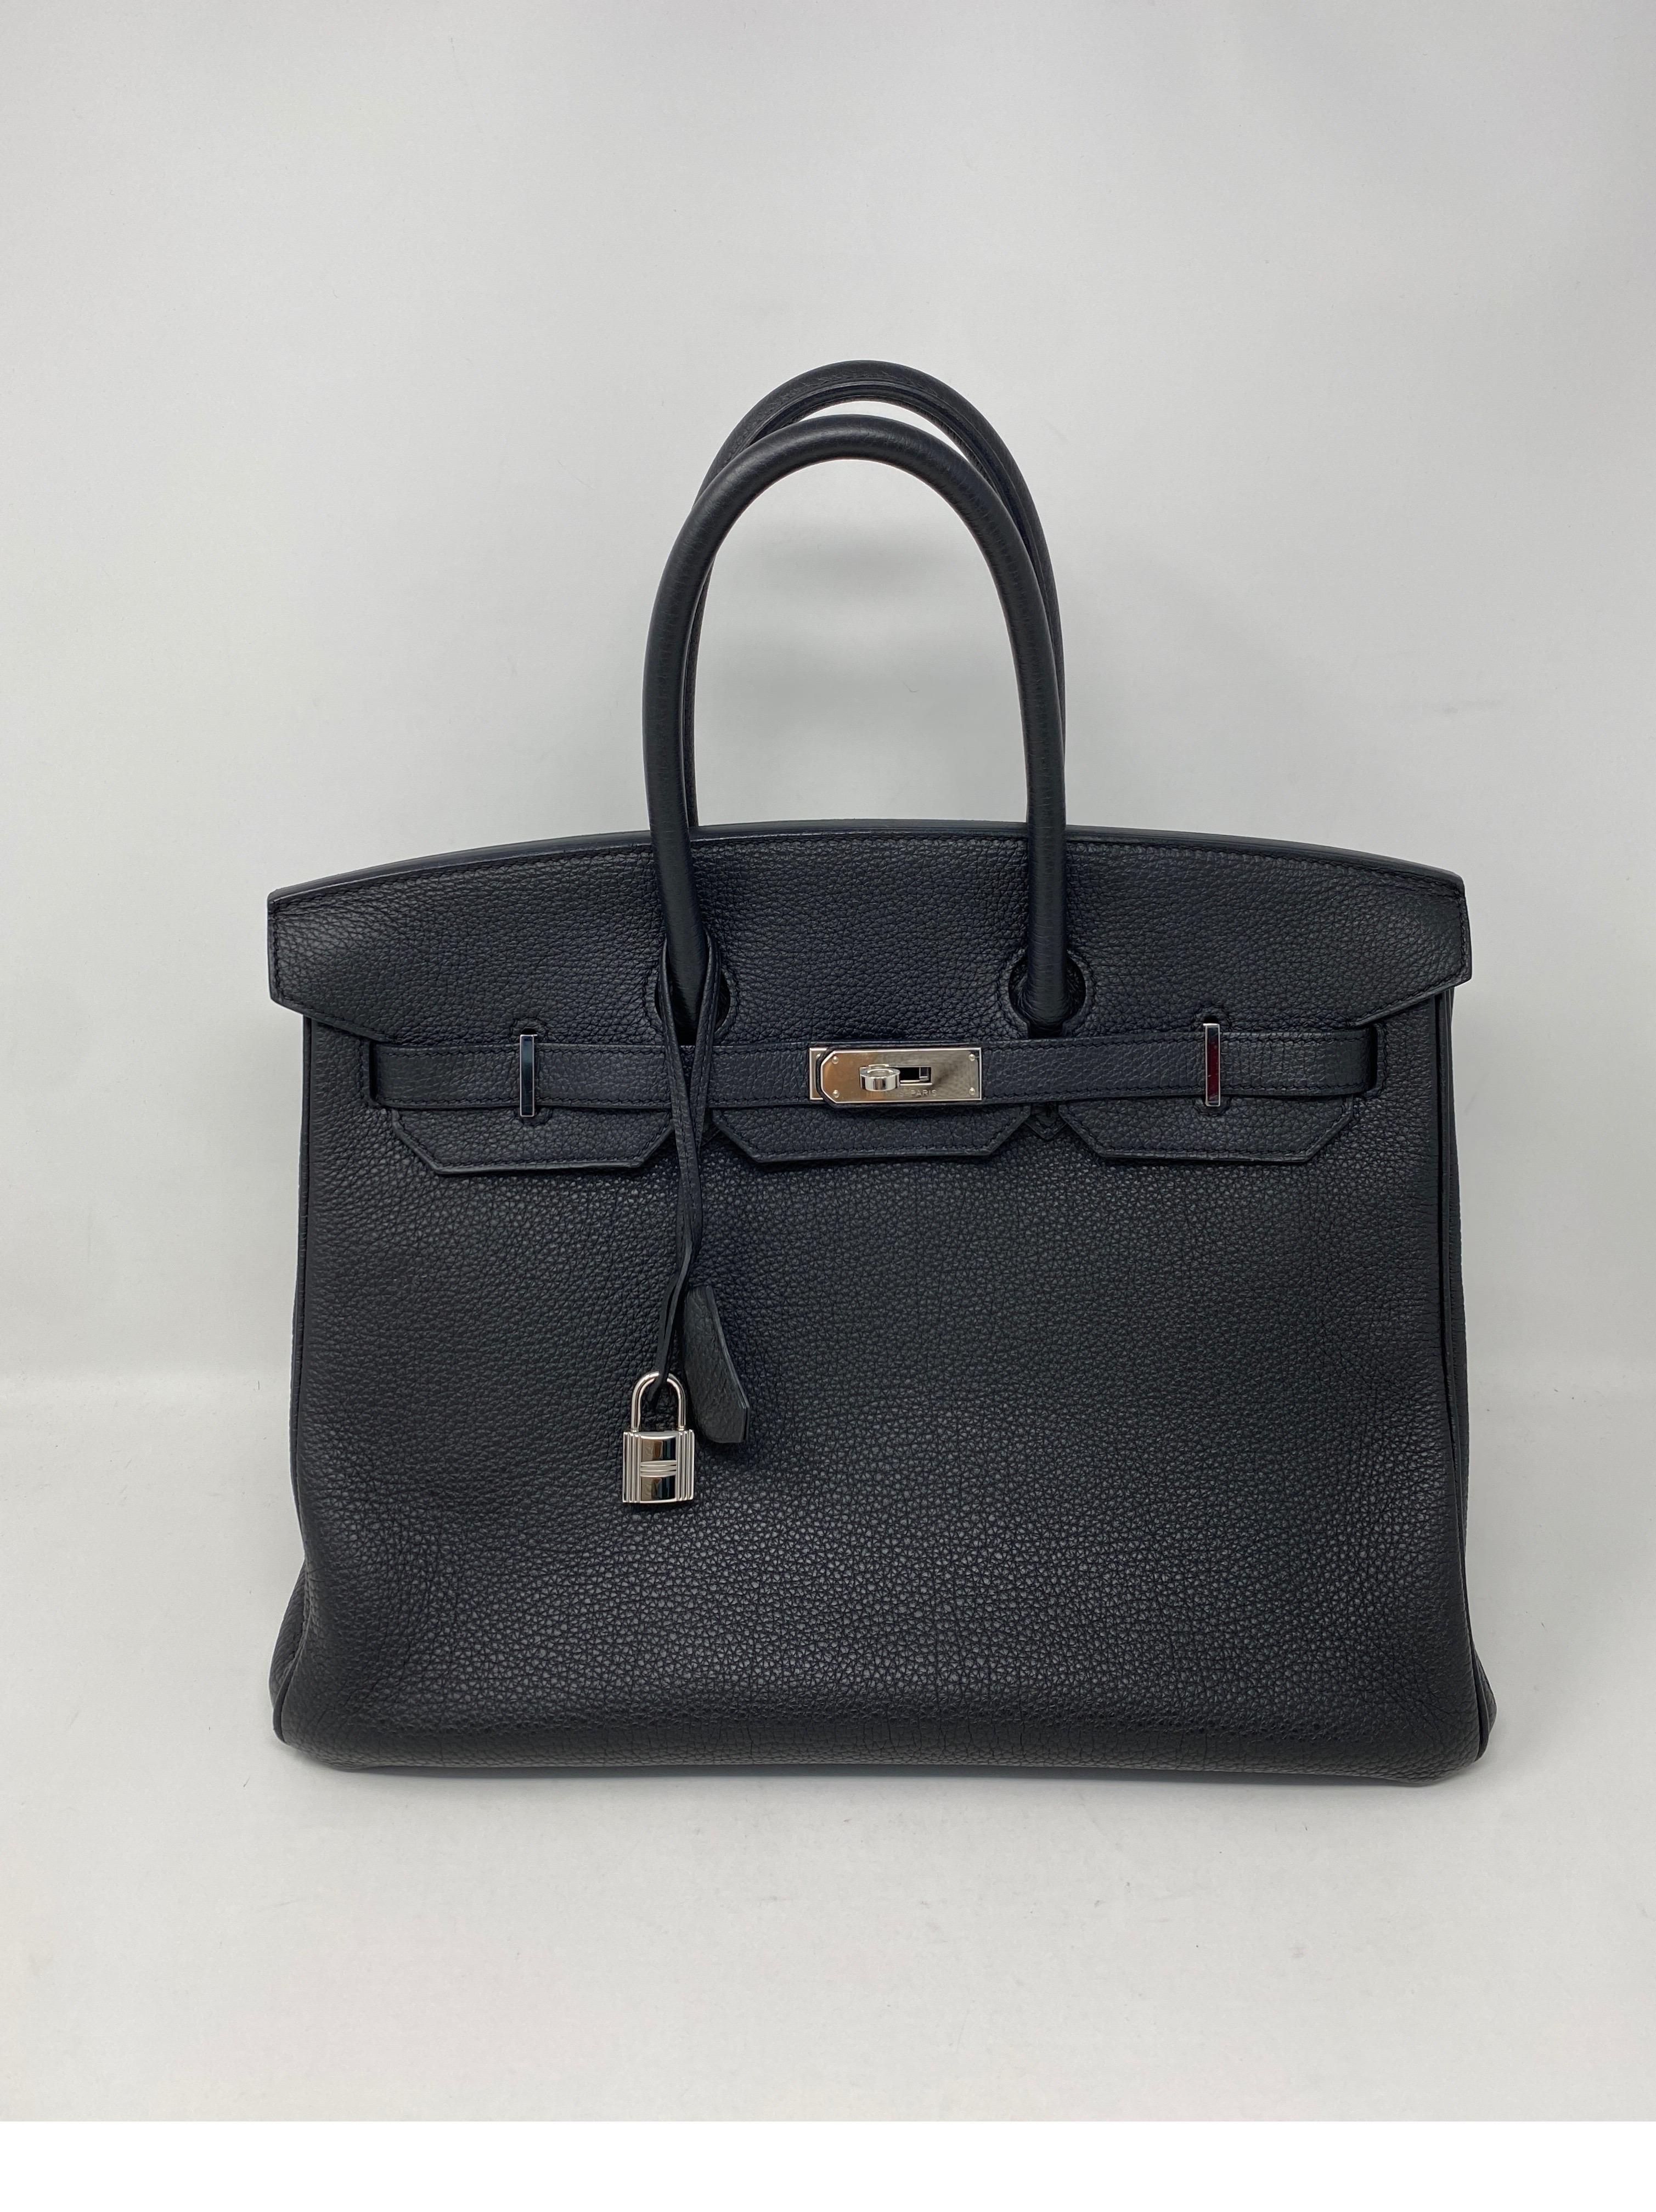 Hermes Black Birkin 35 Bag. Black togo leather with palladium hardware. Excellent condition. Classic most wanted black color. Includes clochette, lock, keys, dust cover and insert included. Clean throughout bag. Guaranteed authentic. 